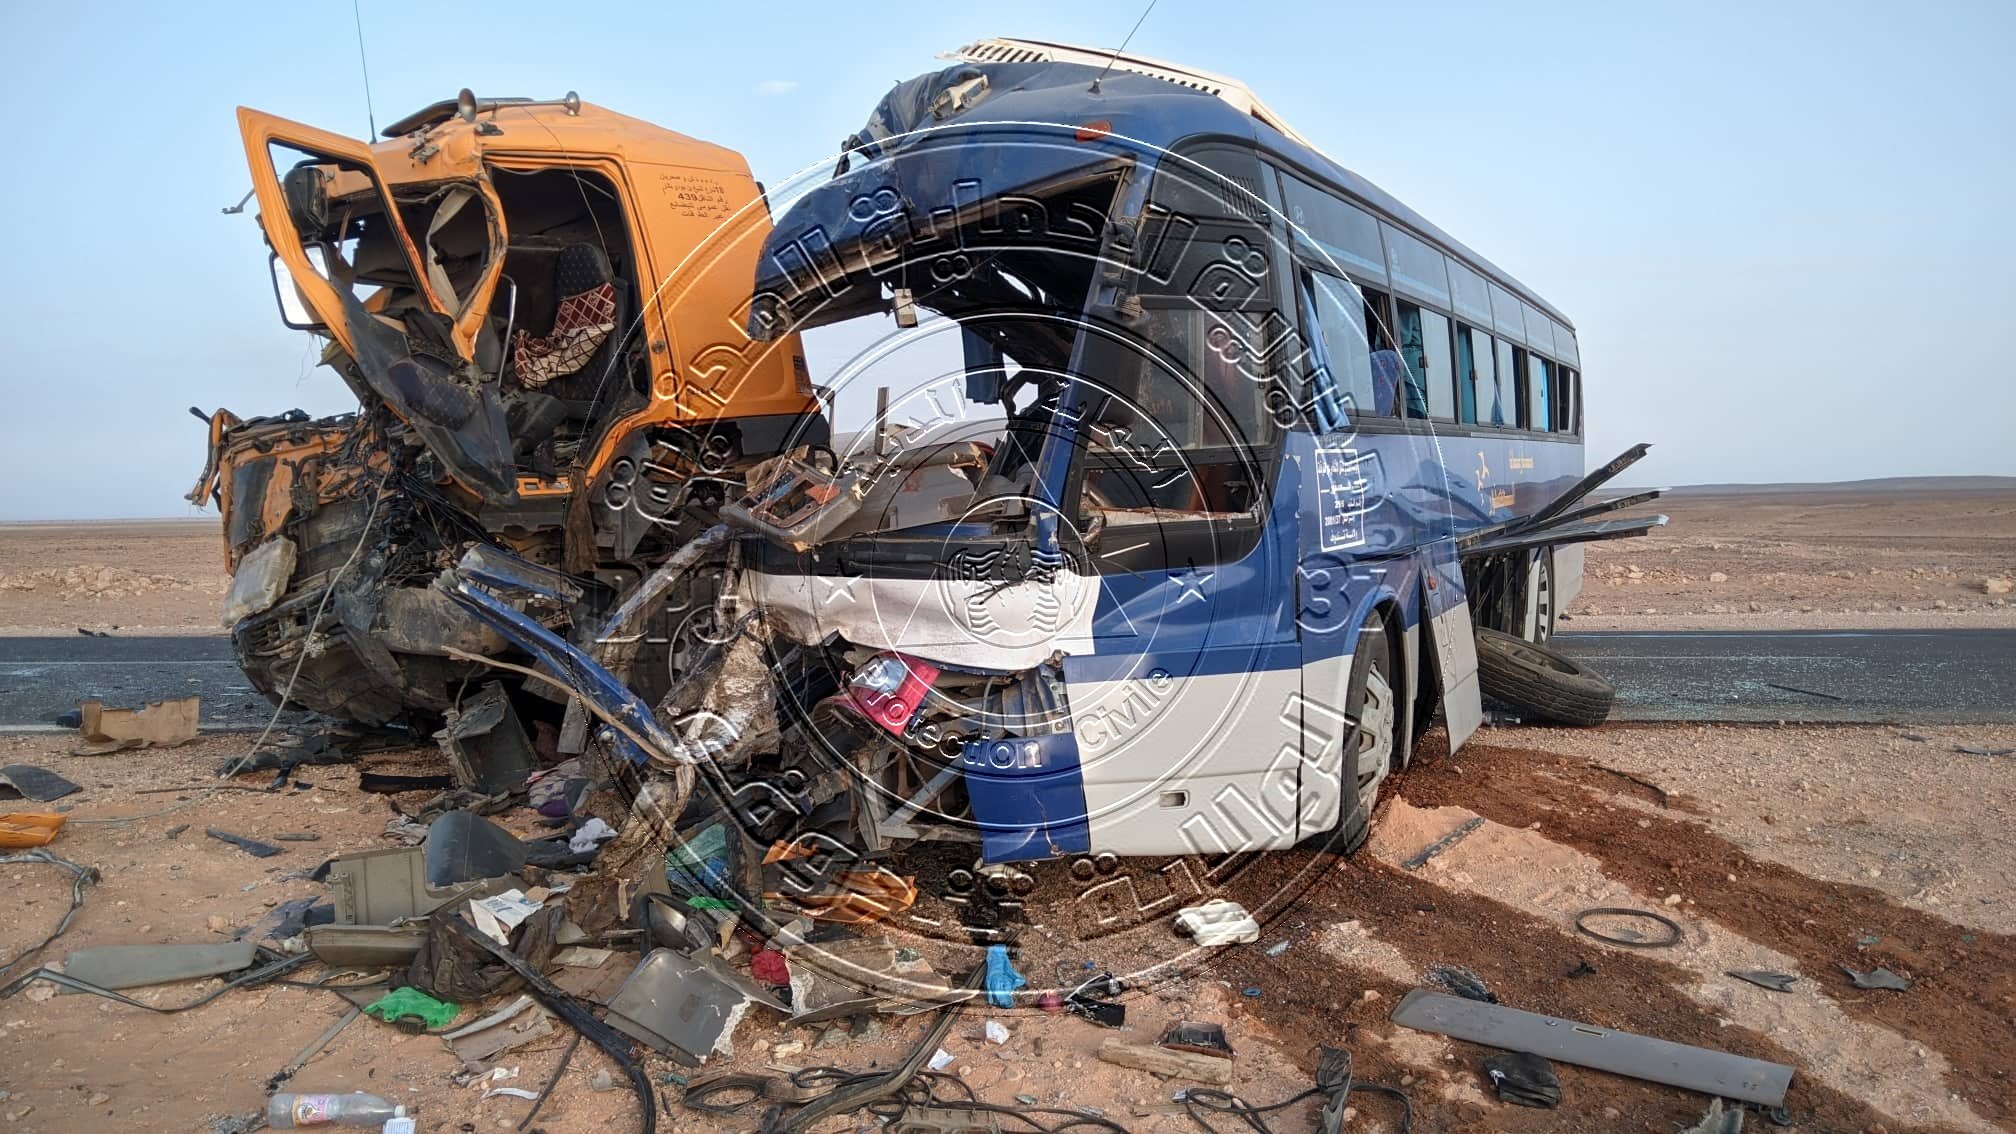 Traffic accidents claimed the lives of 13 people and injured 424 others during the last 48 hours - Algerian Dialogue